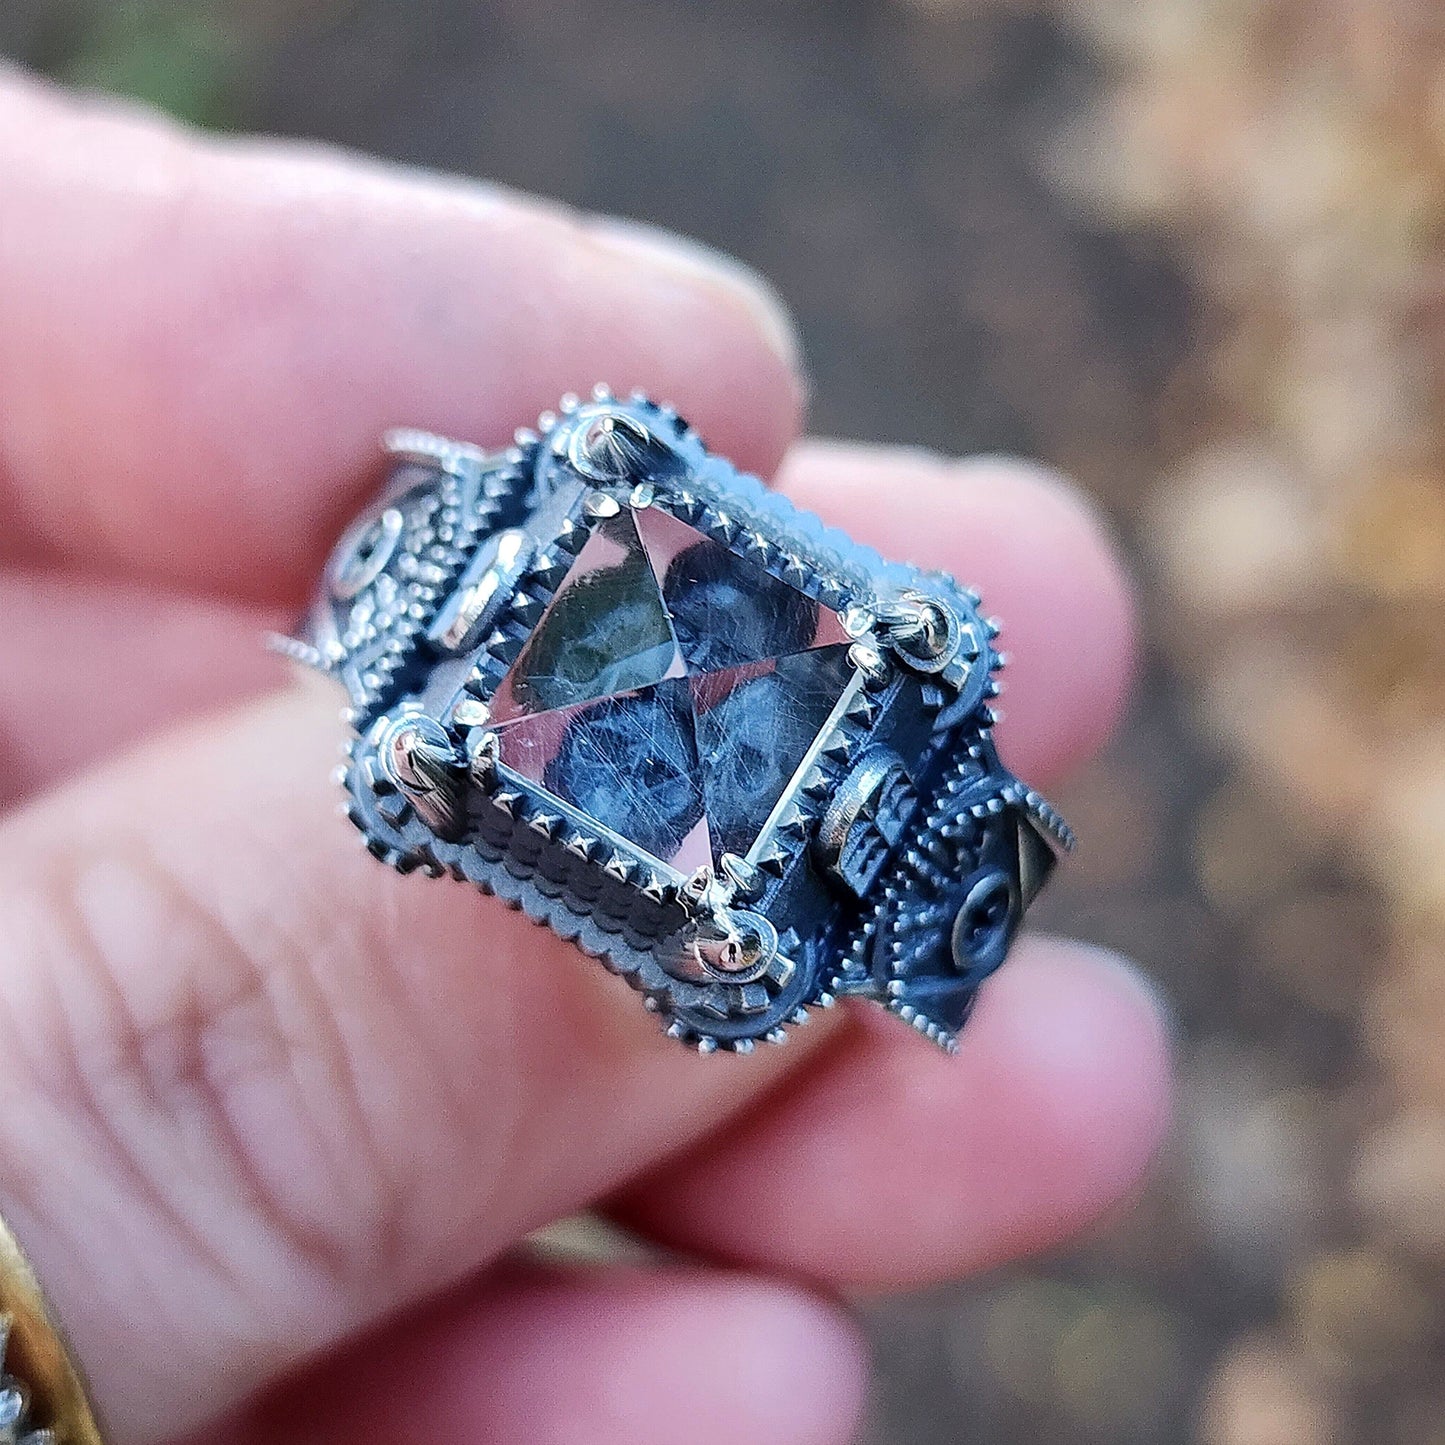 Ready to Ship Size 9-11 Mens Tower Ring with Skelton and Pyramid Quartz Large Sterling Silver Gothic Statement Ring